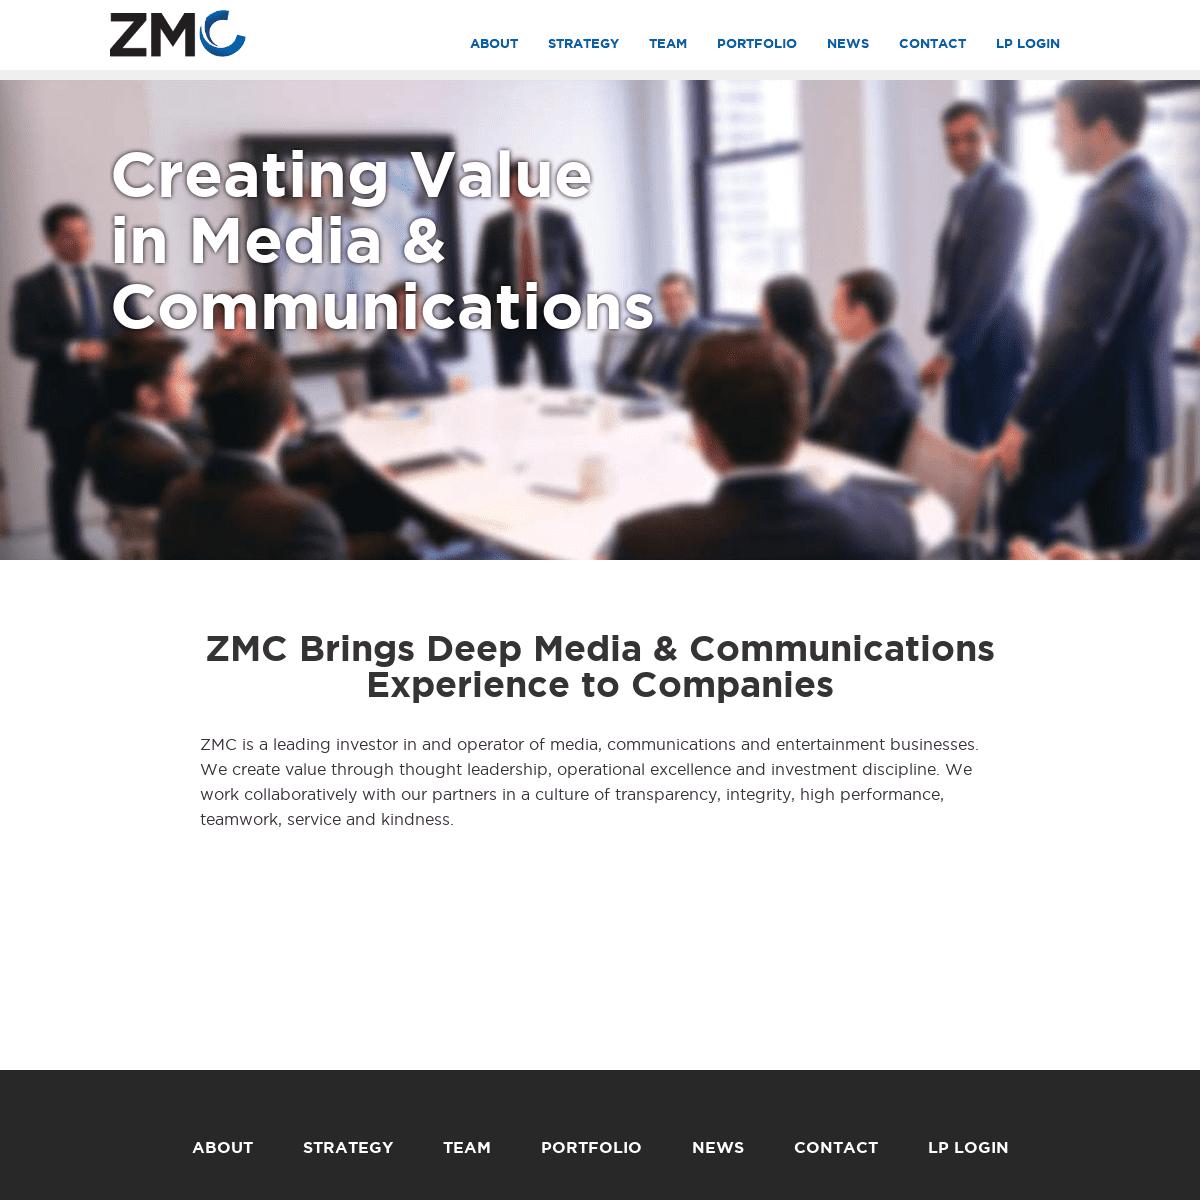 A complete backup of zmclp.com